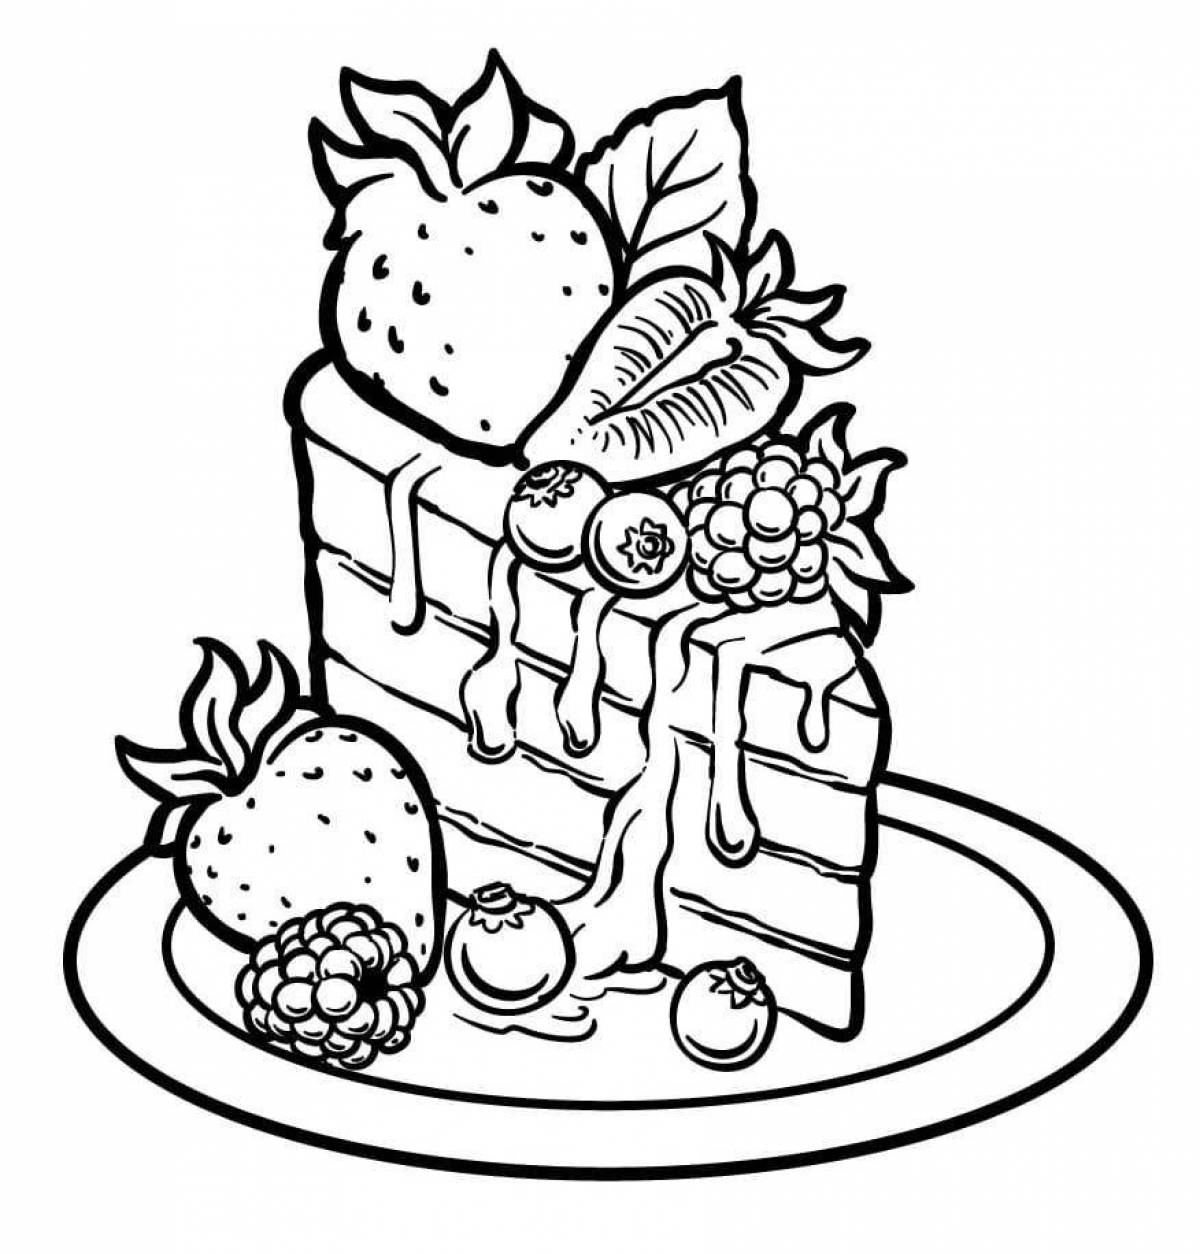 Colorful cake coloring page for 3-4 year olds